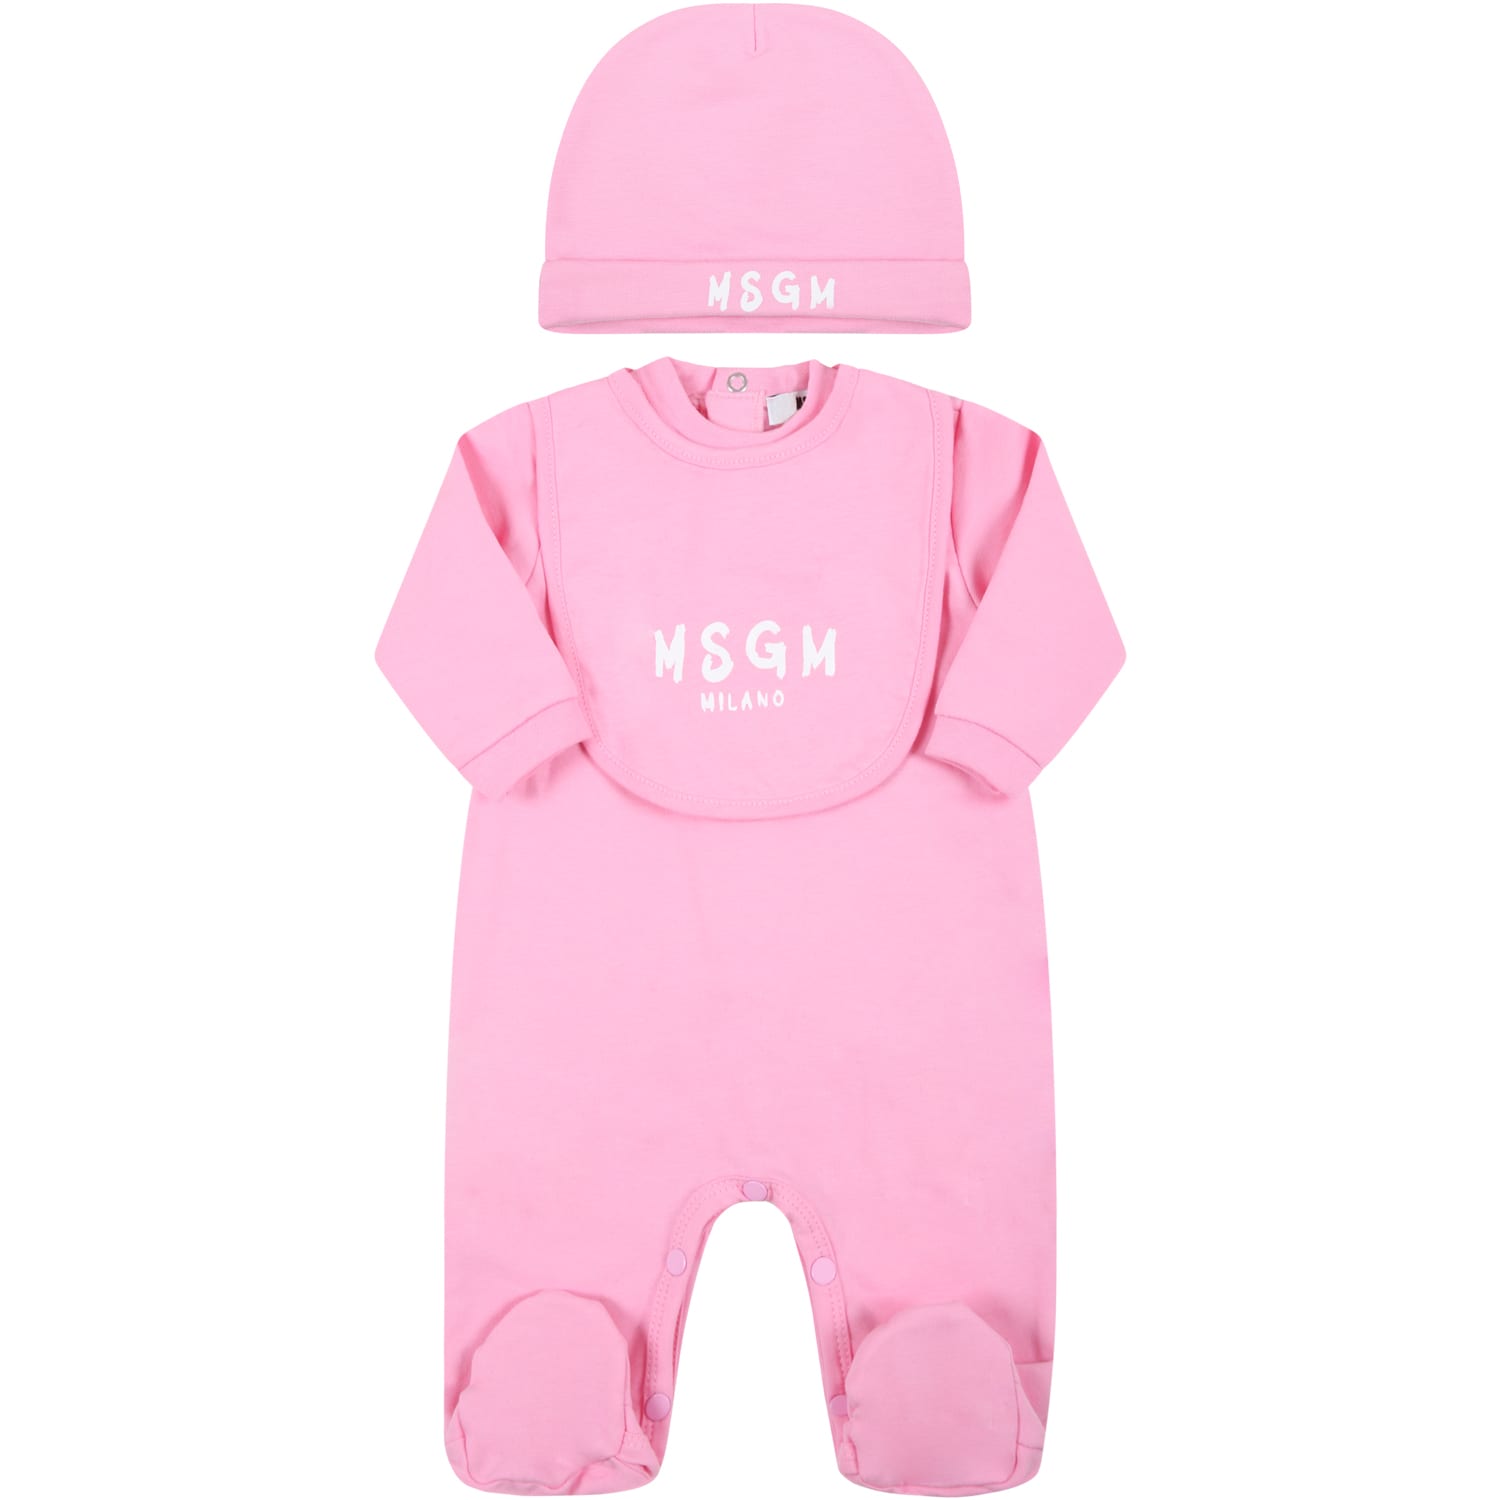 MSGM Pink Set Fo Baby Girl With White Logo